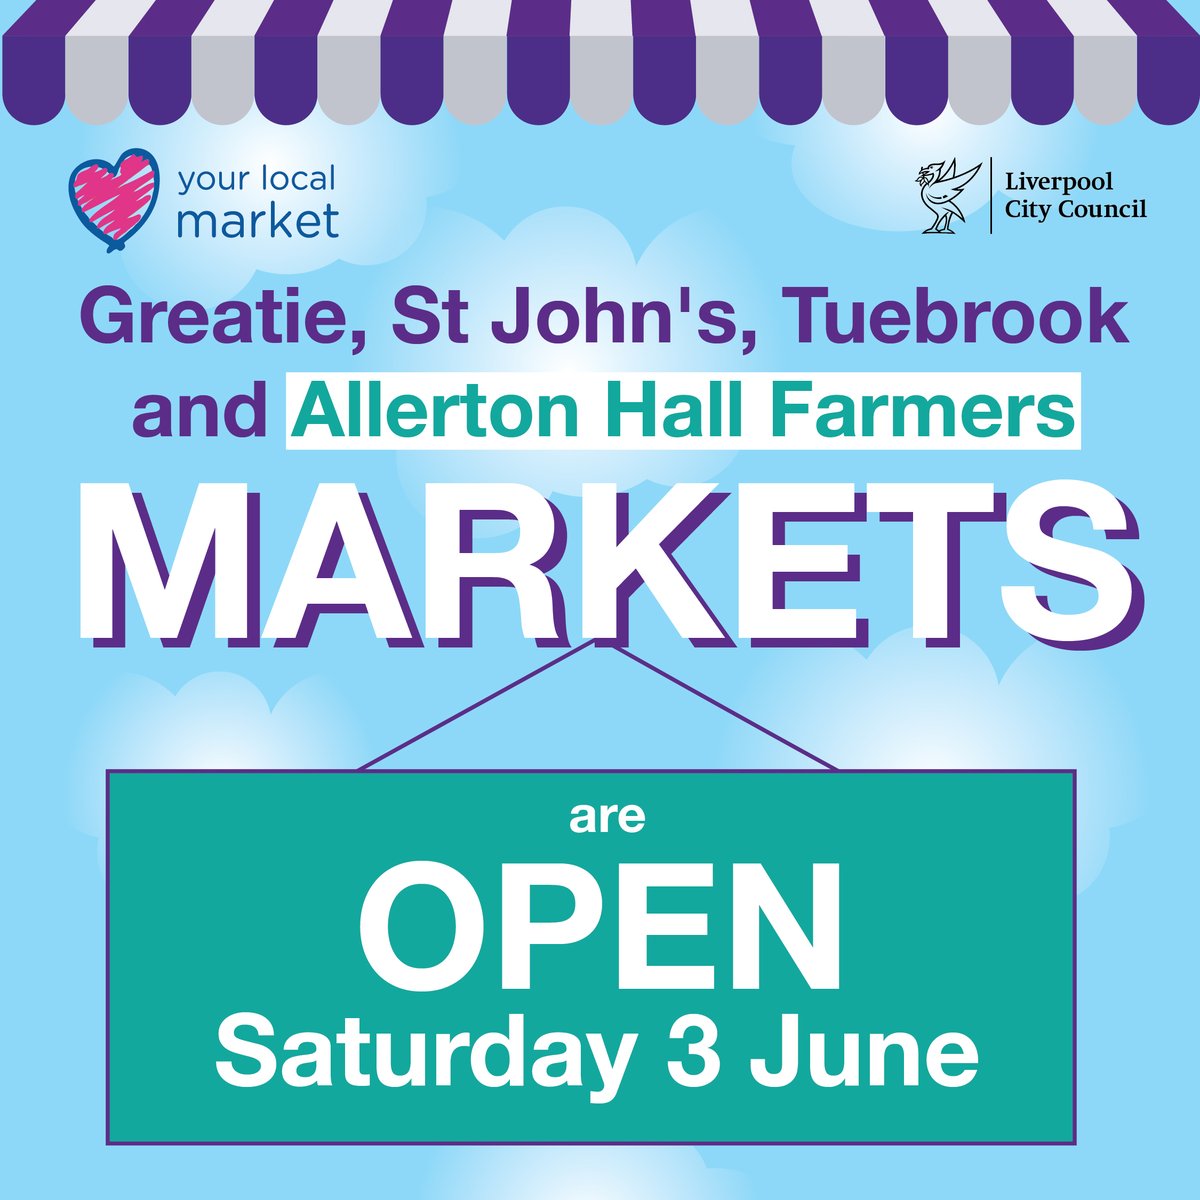 Fancy getting out in the sunshine? 😎 

Four fab markets are open on Saturday, why not pay them a visit?

⏰ Opening times bit.ly/3Ww0QGx